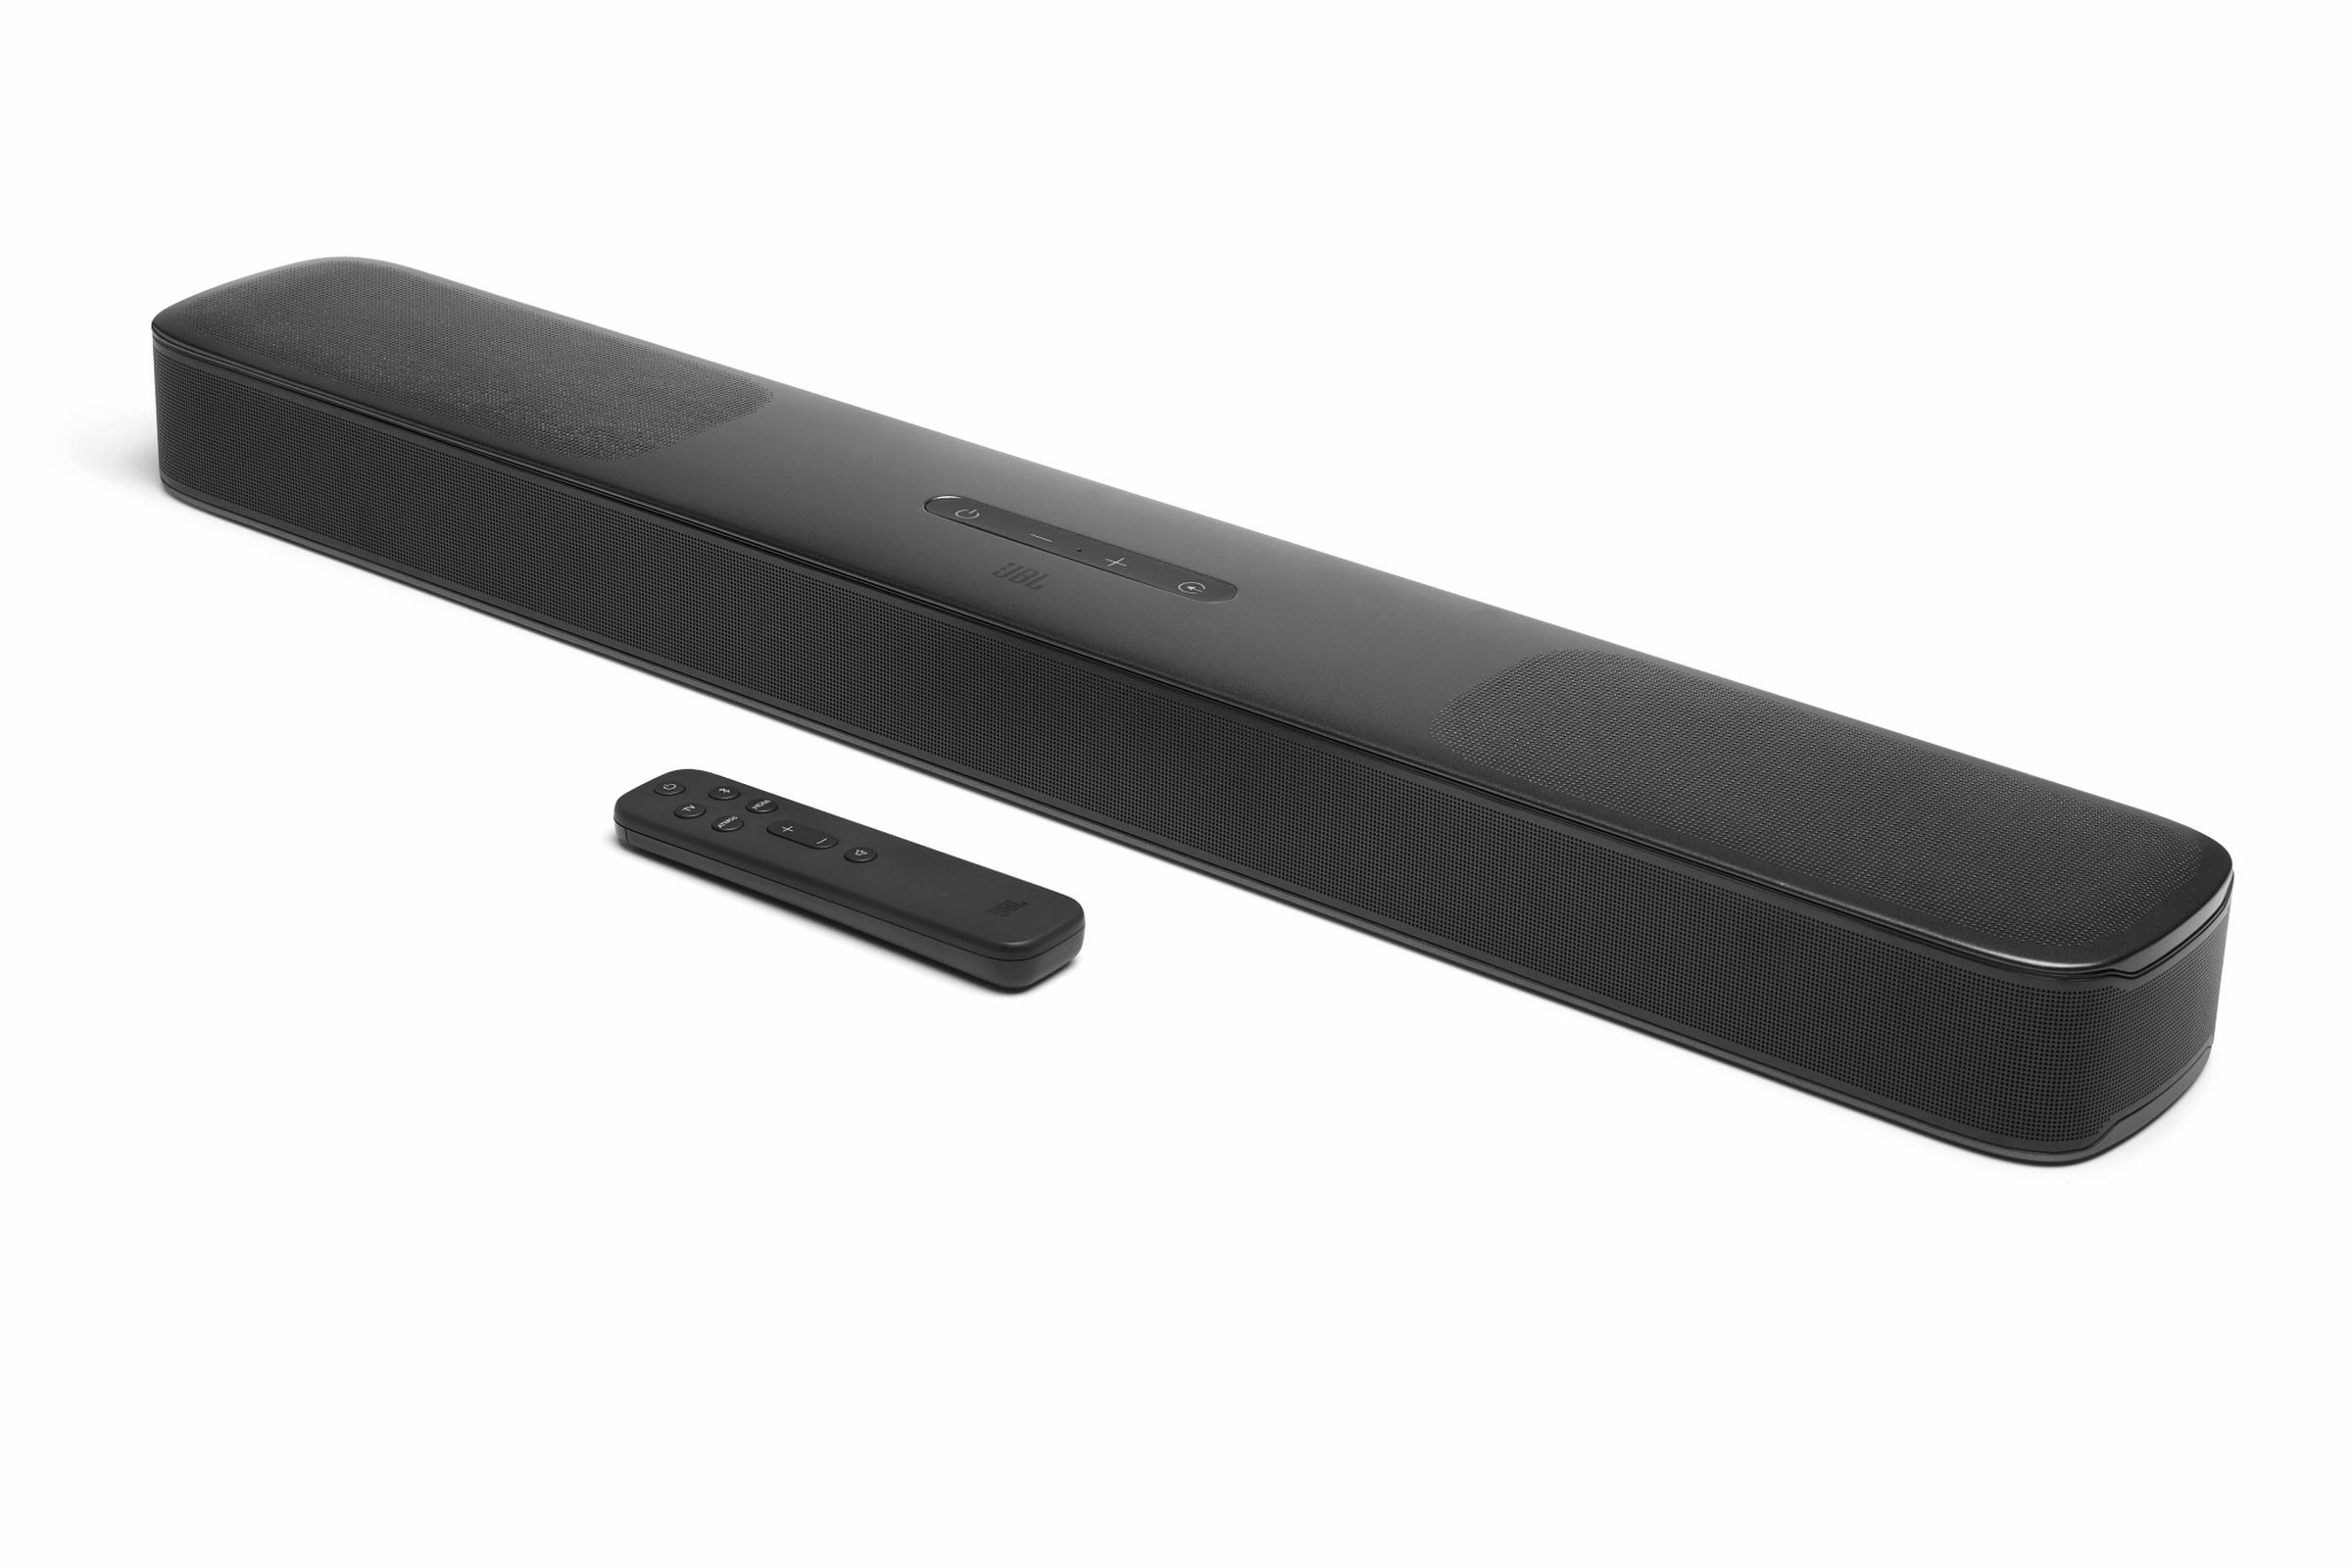 The Bar 5.0 Multibeam comes a year after JBL’s first Atmos soundbar.